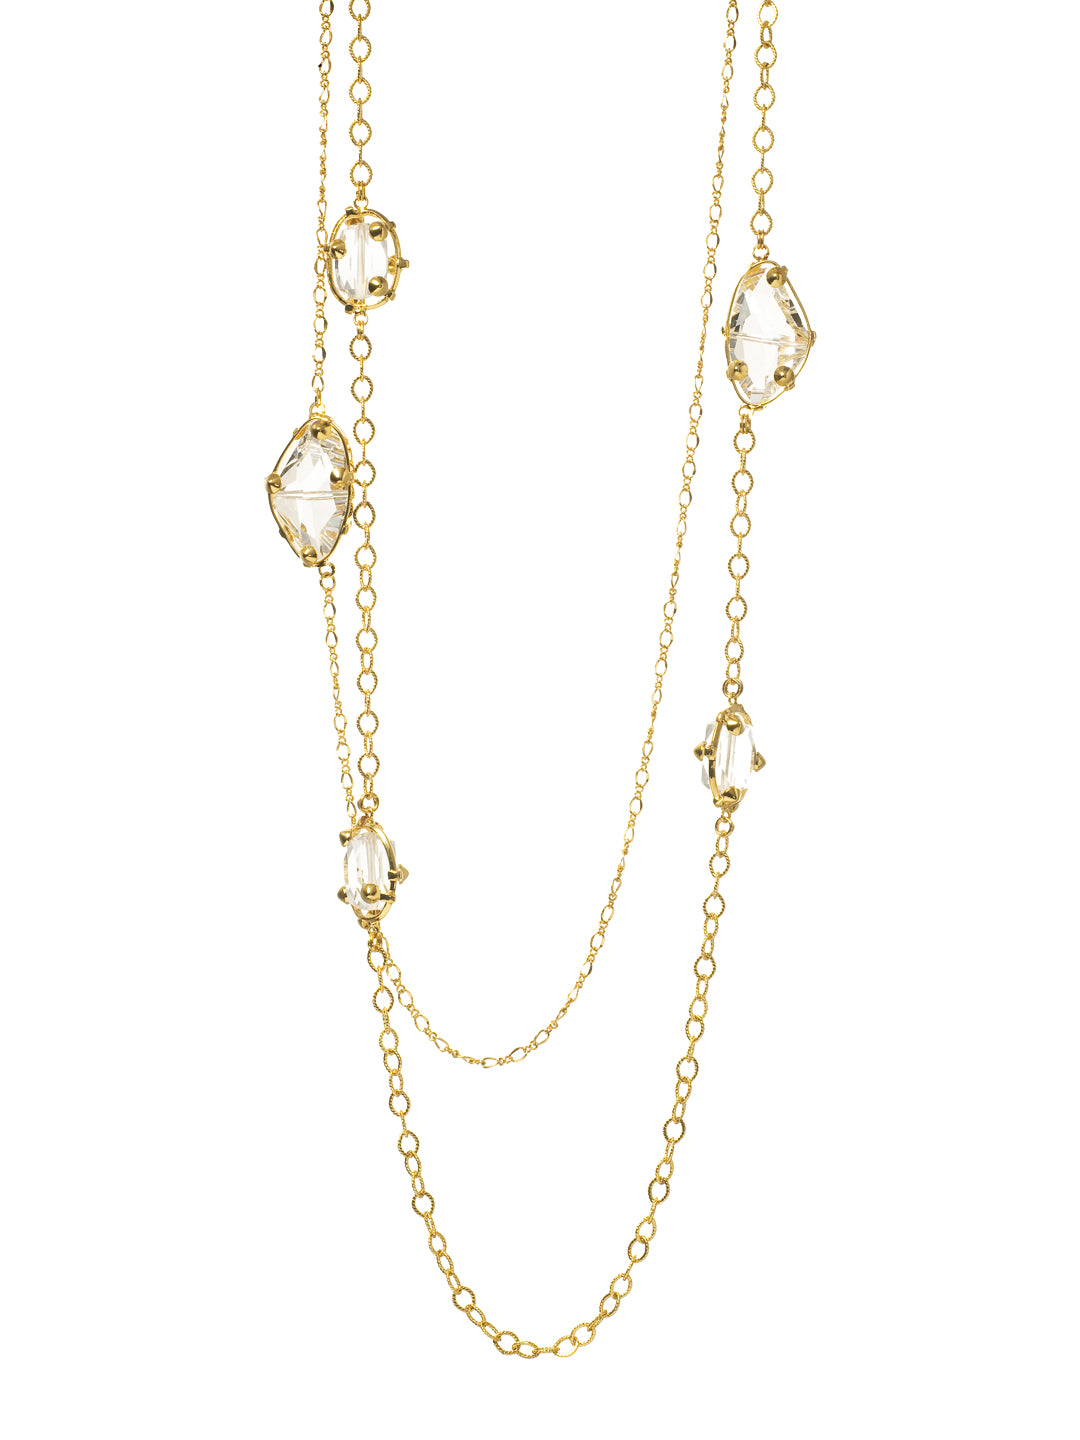 Crystal Galactic Bead Long Strand Necklace - 4NK13BGRDX - <p>A double strand necklace with clear galactic beads and triangle fold overs. This look is organic, and sparkling! From Sorrelli's Redux collection in our Bright Gold-tone finish.</p>